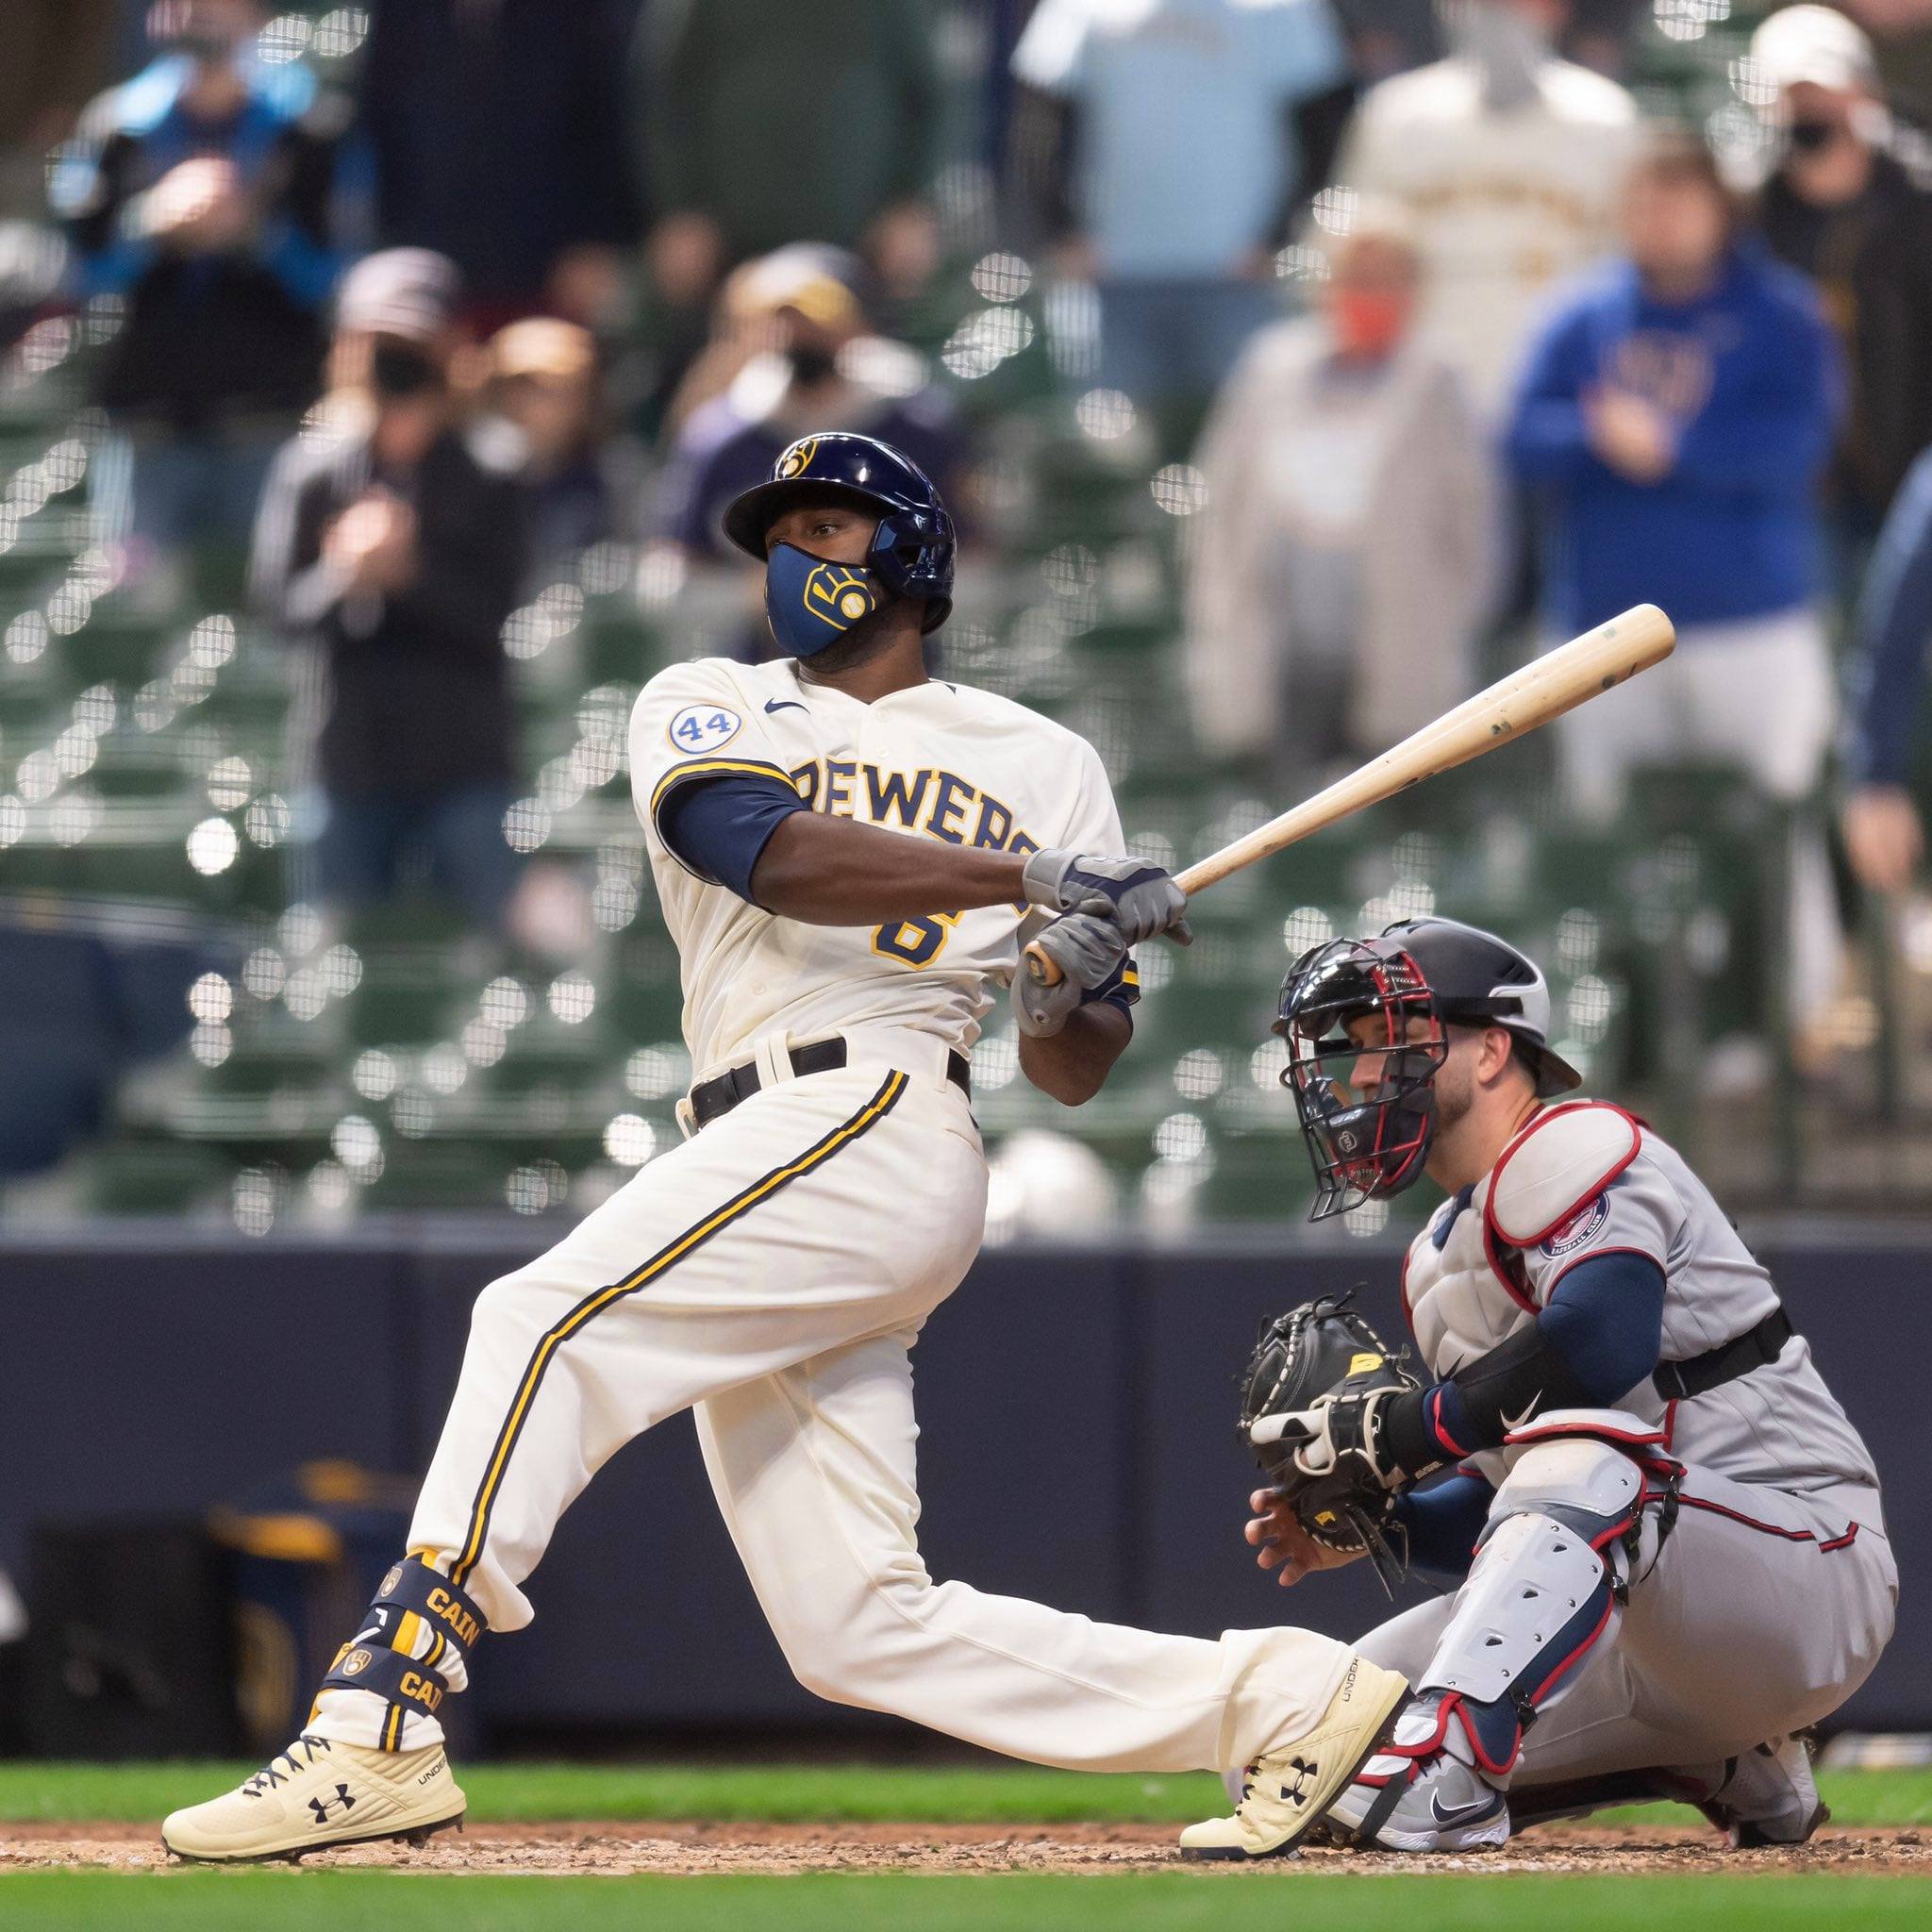 Brewers: Why Hasn't Luis Urias Been In the Starting Lineup Lately?